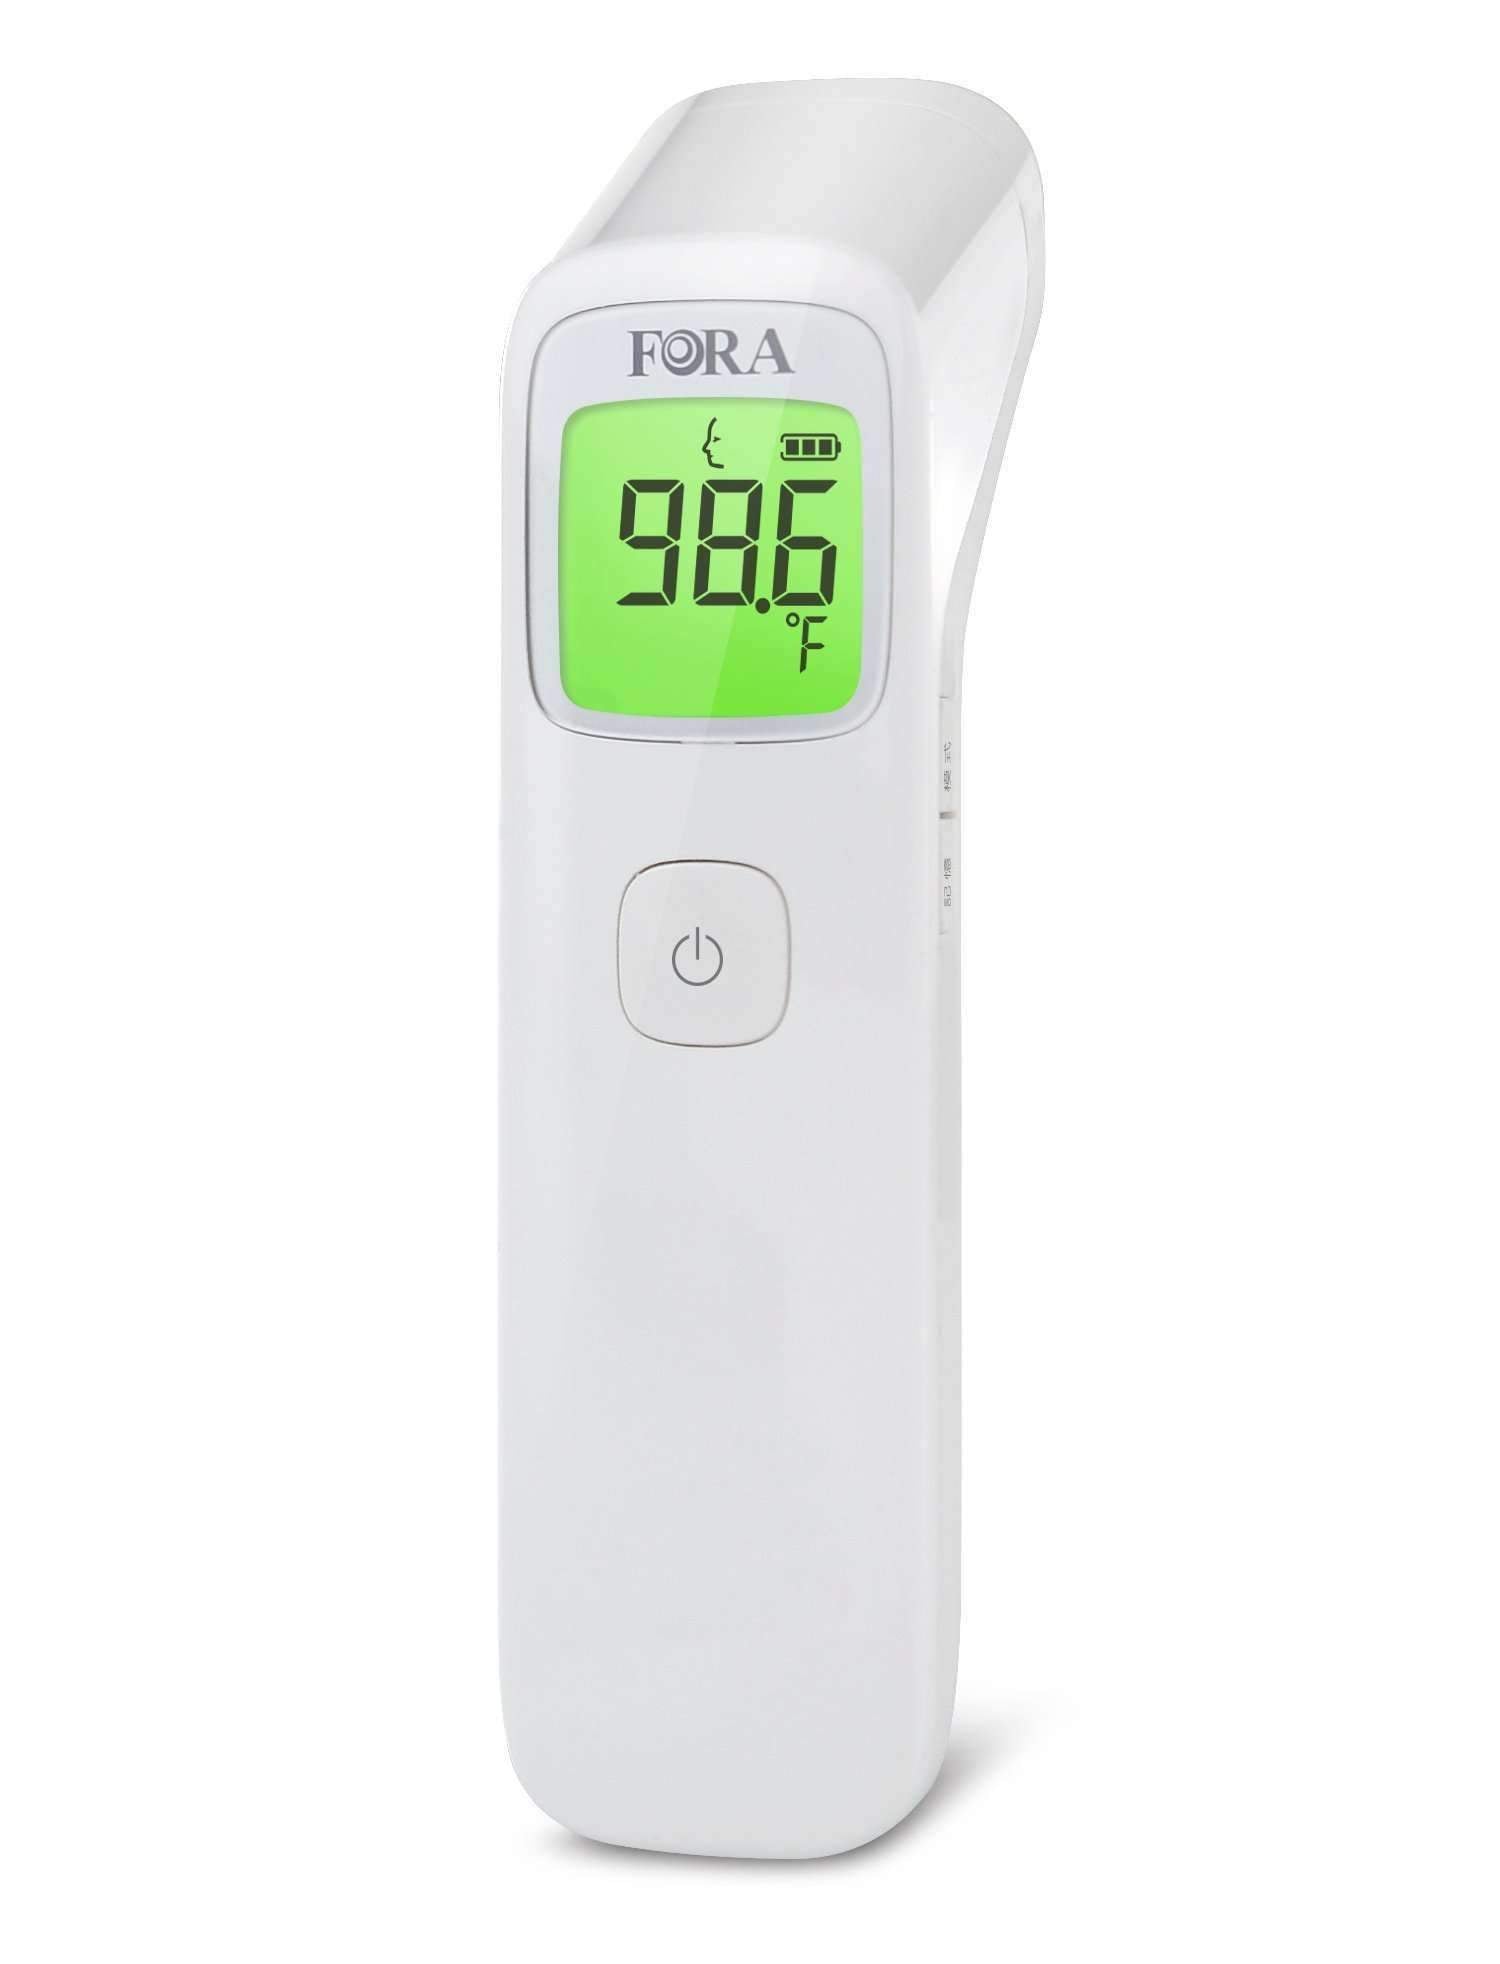 Foracare IR42 Forehead Thermometer